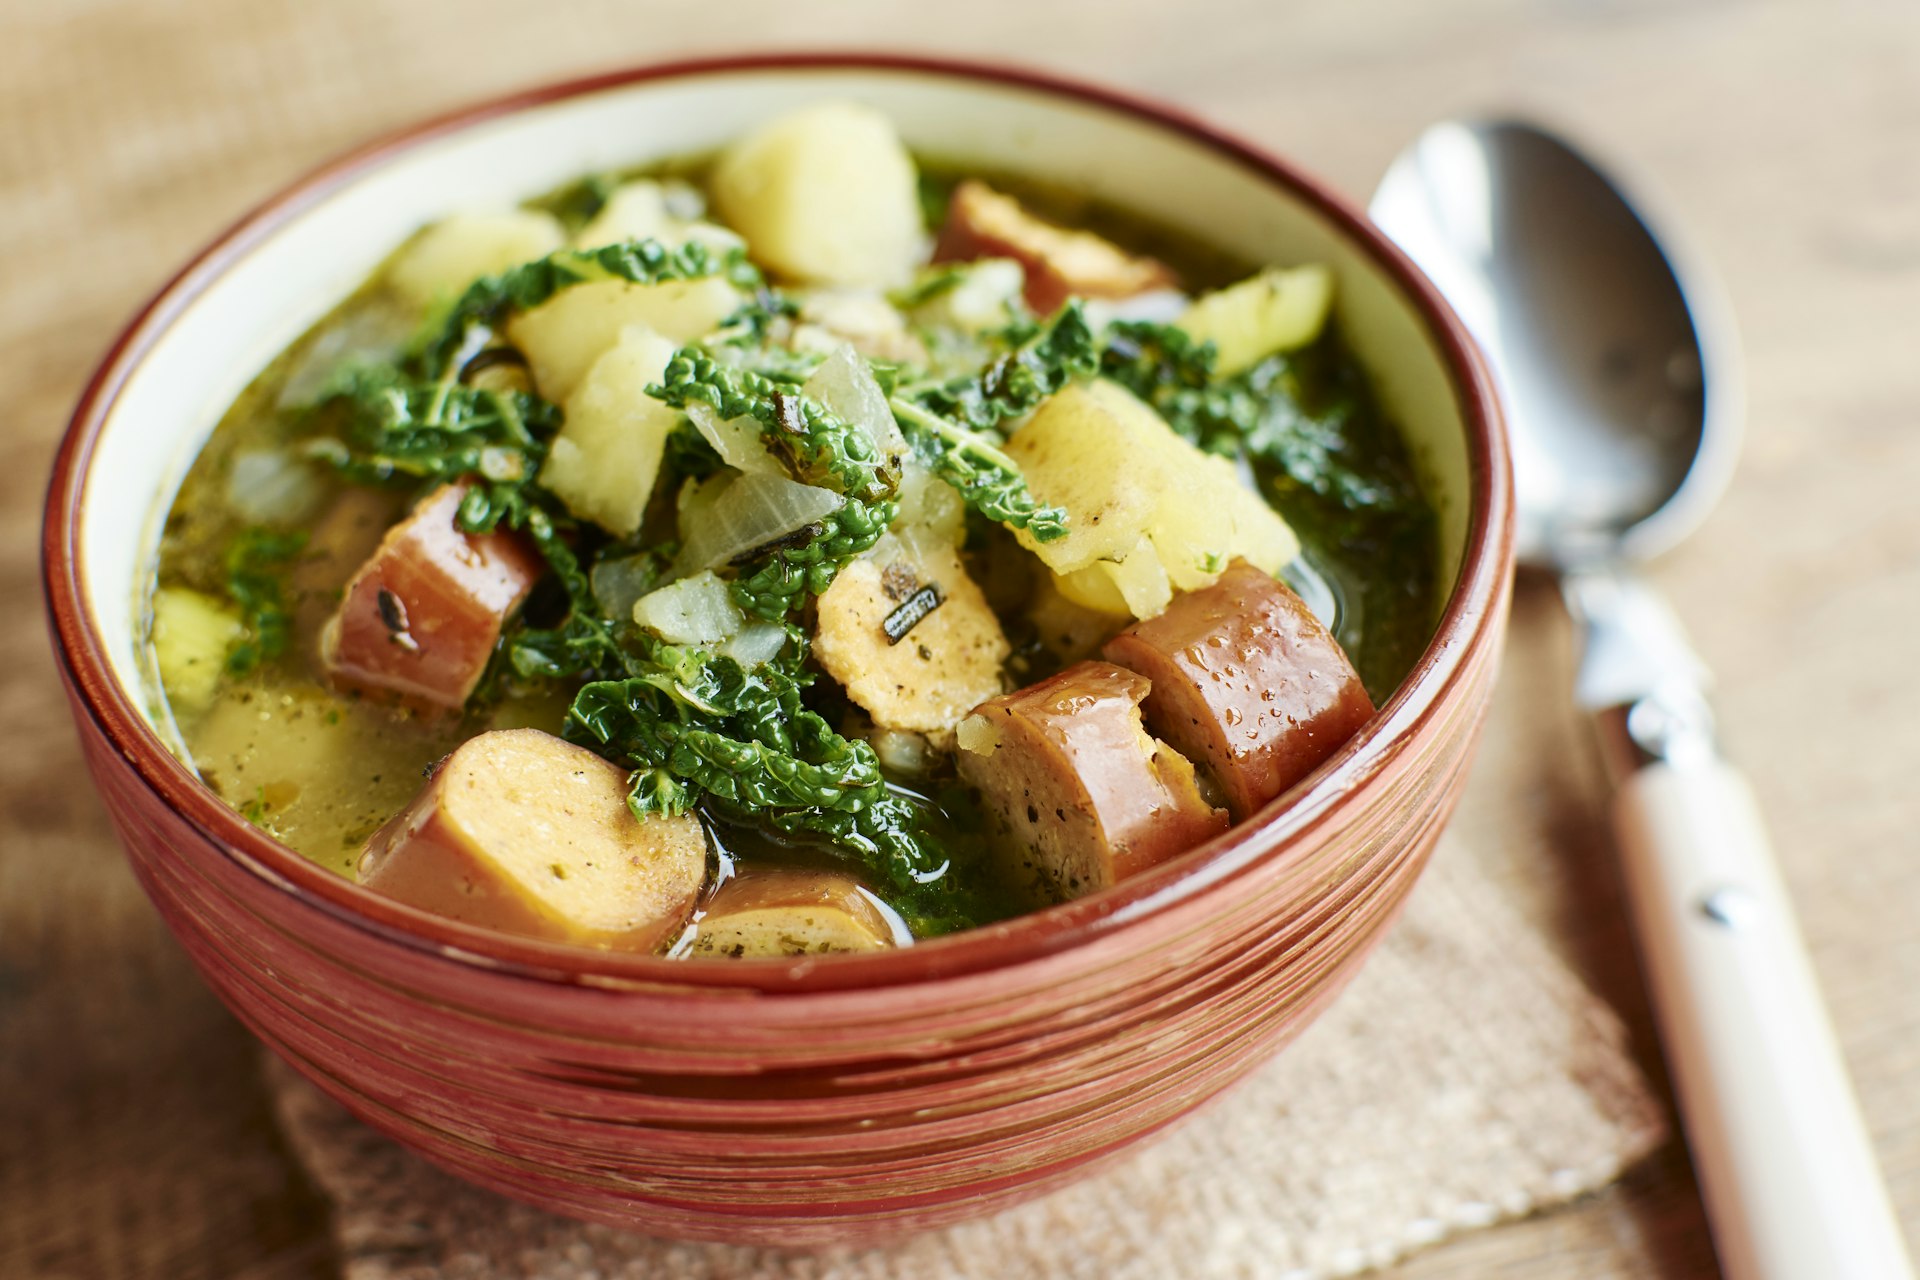 Portuguese Caldo Verde with potatoes, savoy cabbage and vegan sausages